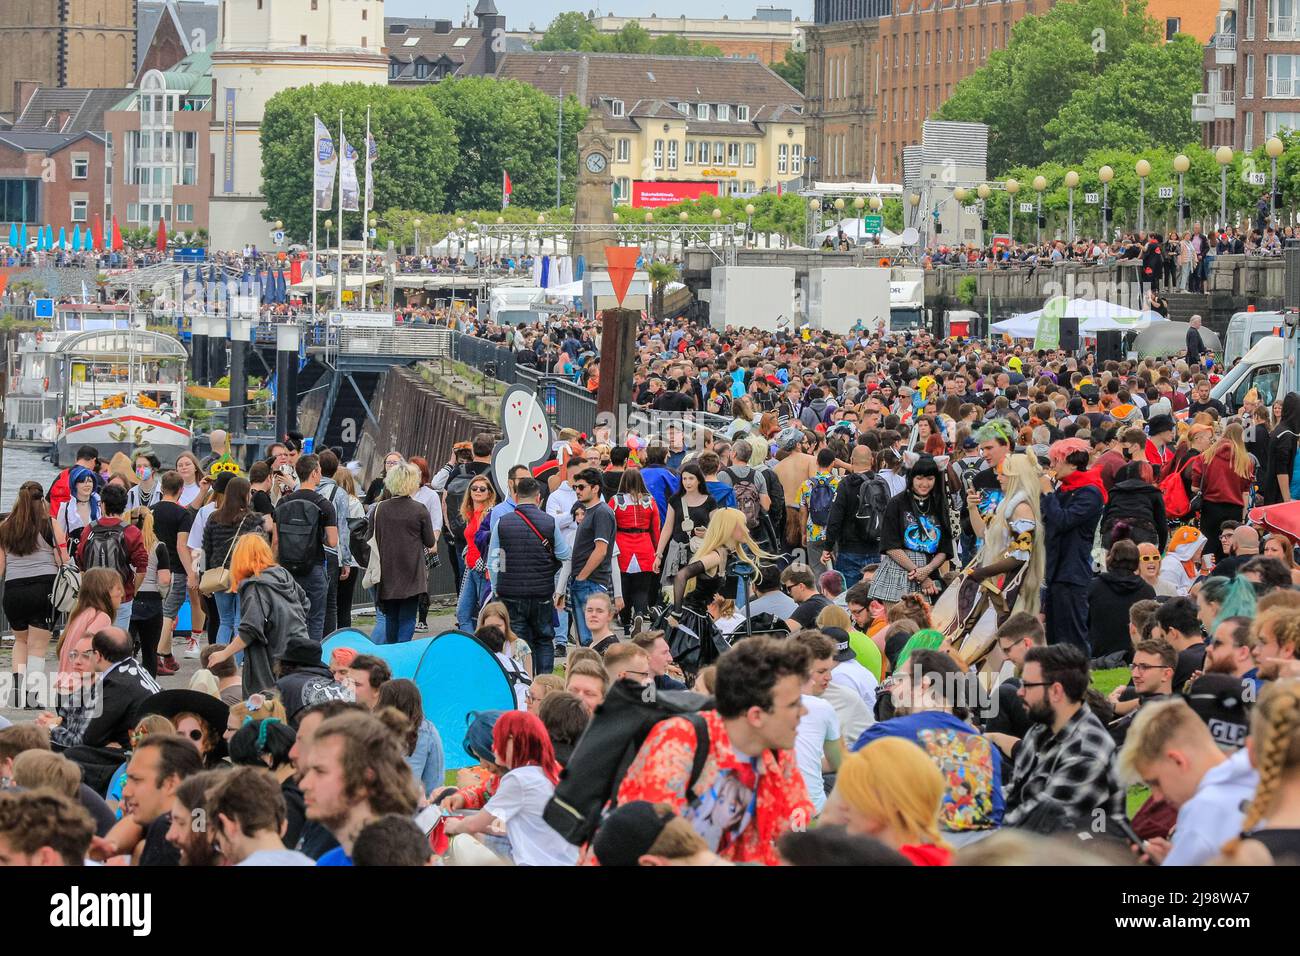 Düsseldorf, NRW, Germany. 21st May, 2022. The river bank is packed with people. Tens of thousands of visitors and cosplayers enjoy the warm sunshine along the river Rhine embankment in their outfits inspired by Japanese anime, video and games. Stage performances, cosplay, stalls and demonstrations of Japanese culture, sports and traditions are featured at Düsseldorf's annual Japan Day, celebrating Japan and the Japanese community in the city. Düsseldorf is home to the largest Japanese community in Germany. Credit: Imageplotter/Alamy Live News Stock Photo